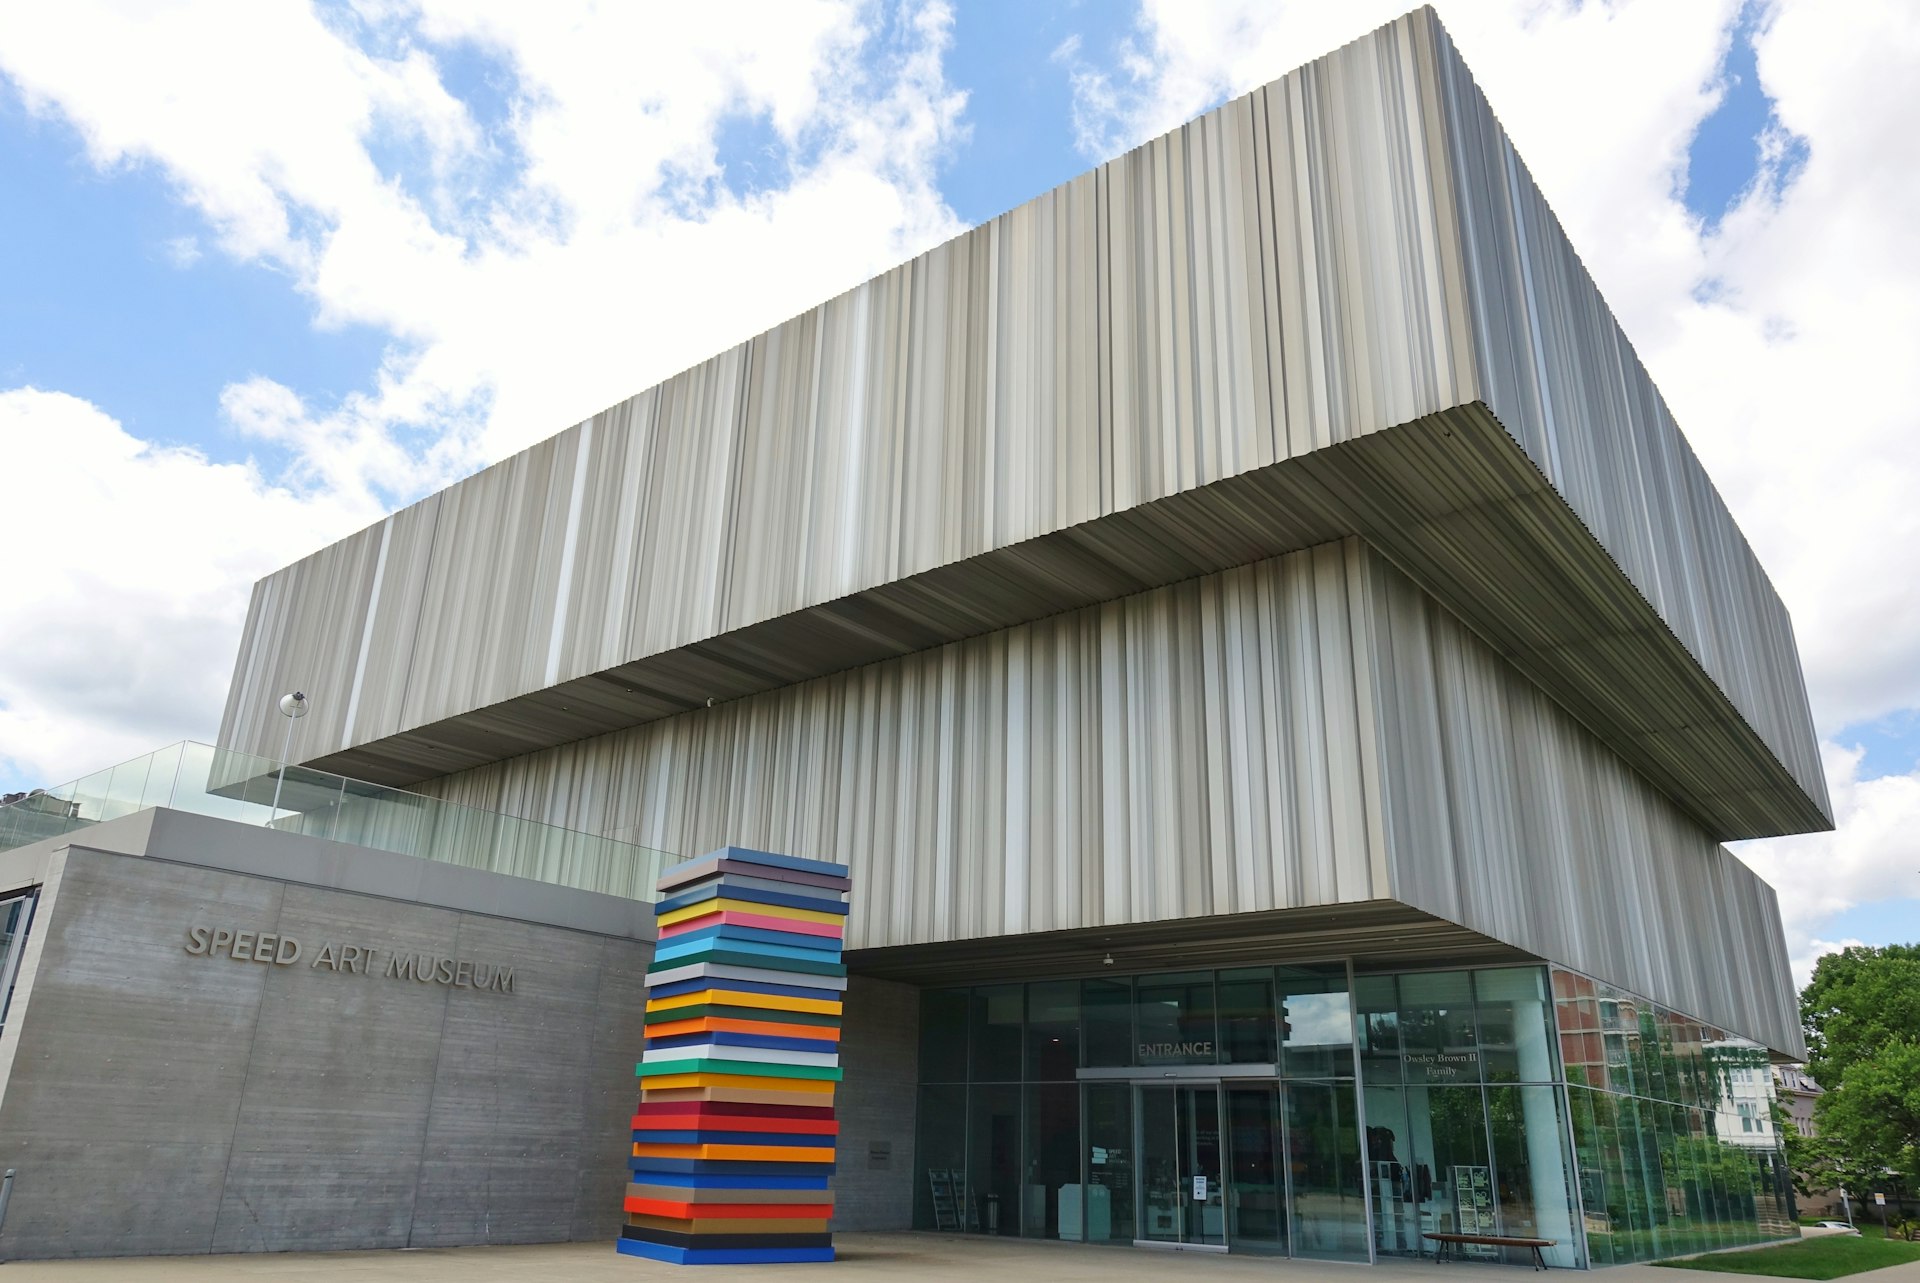 Exterior view of the Speed Art Museum located at the University of Louisville in Kentucky, United States which includes a sculpture that looks like an uneven stack of colourful books and fritted glass trim.